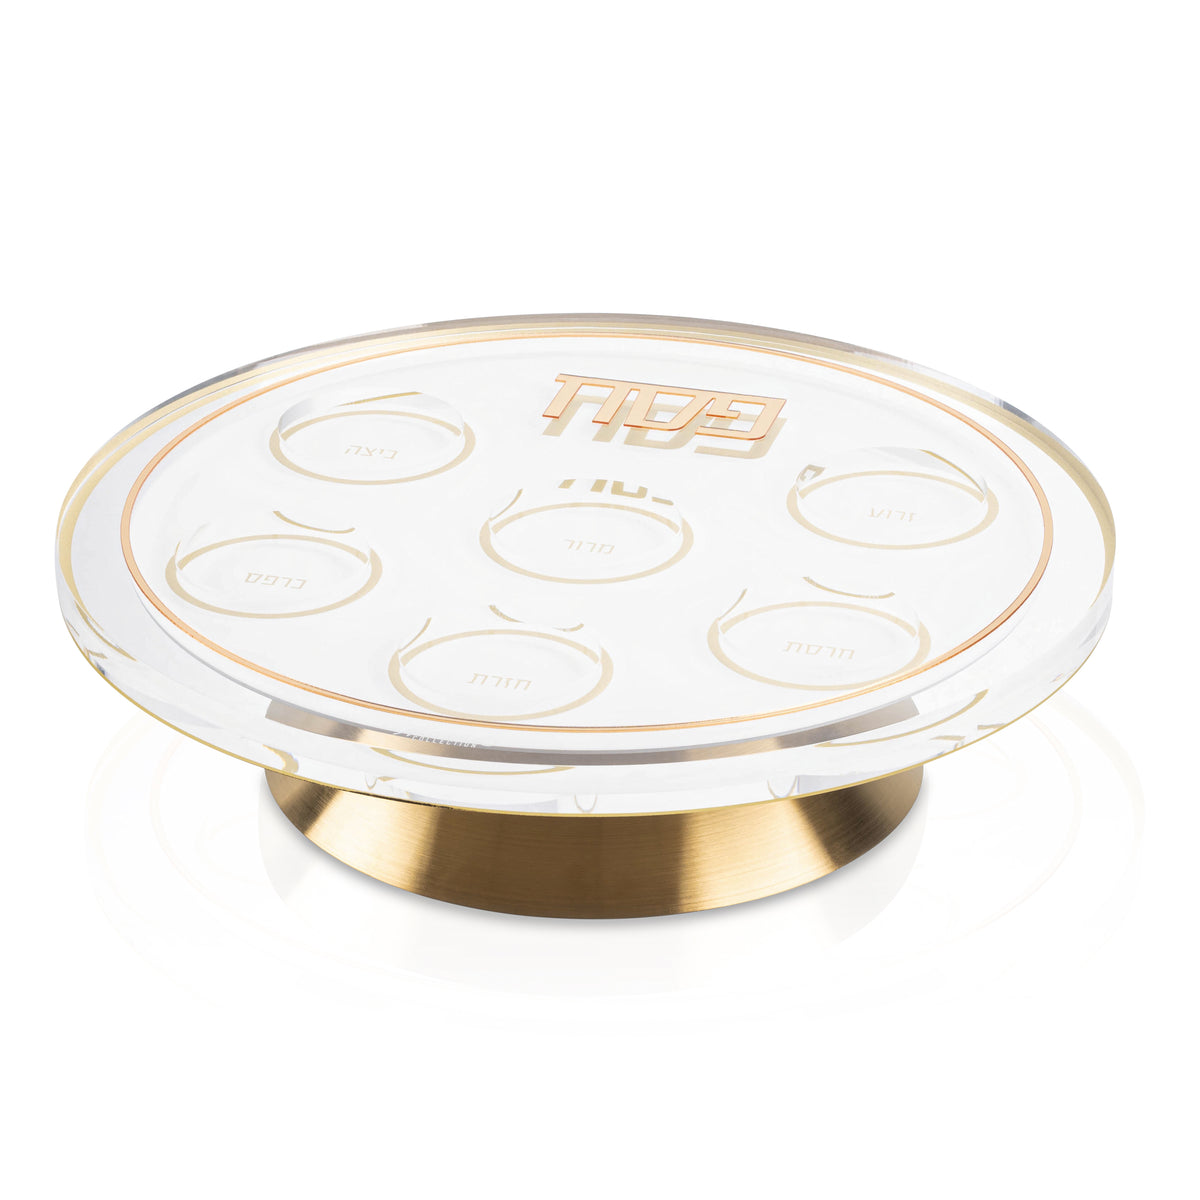 Waterdale Classic 2.0, Seder Plate,Gold